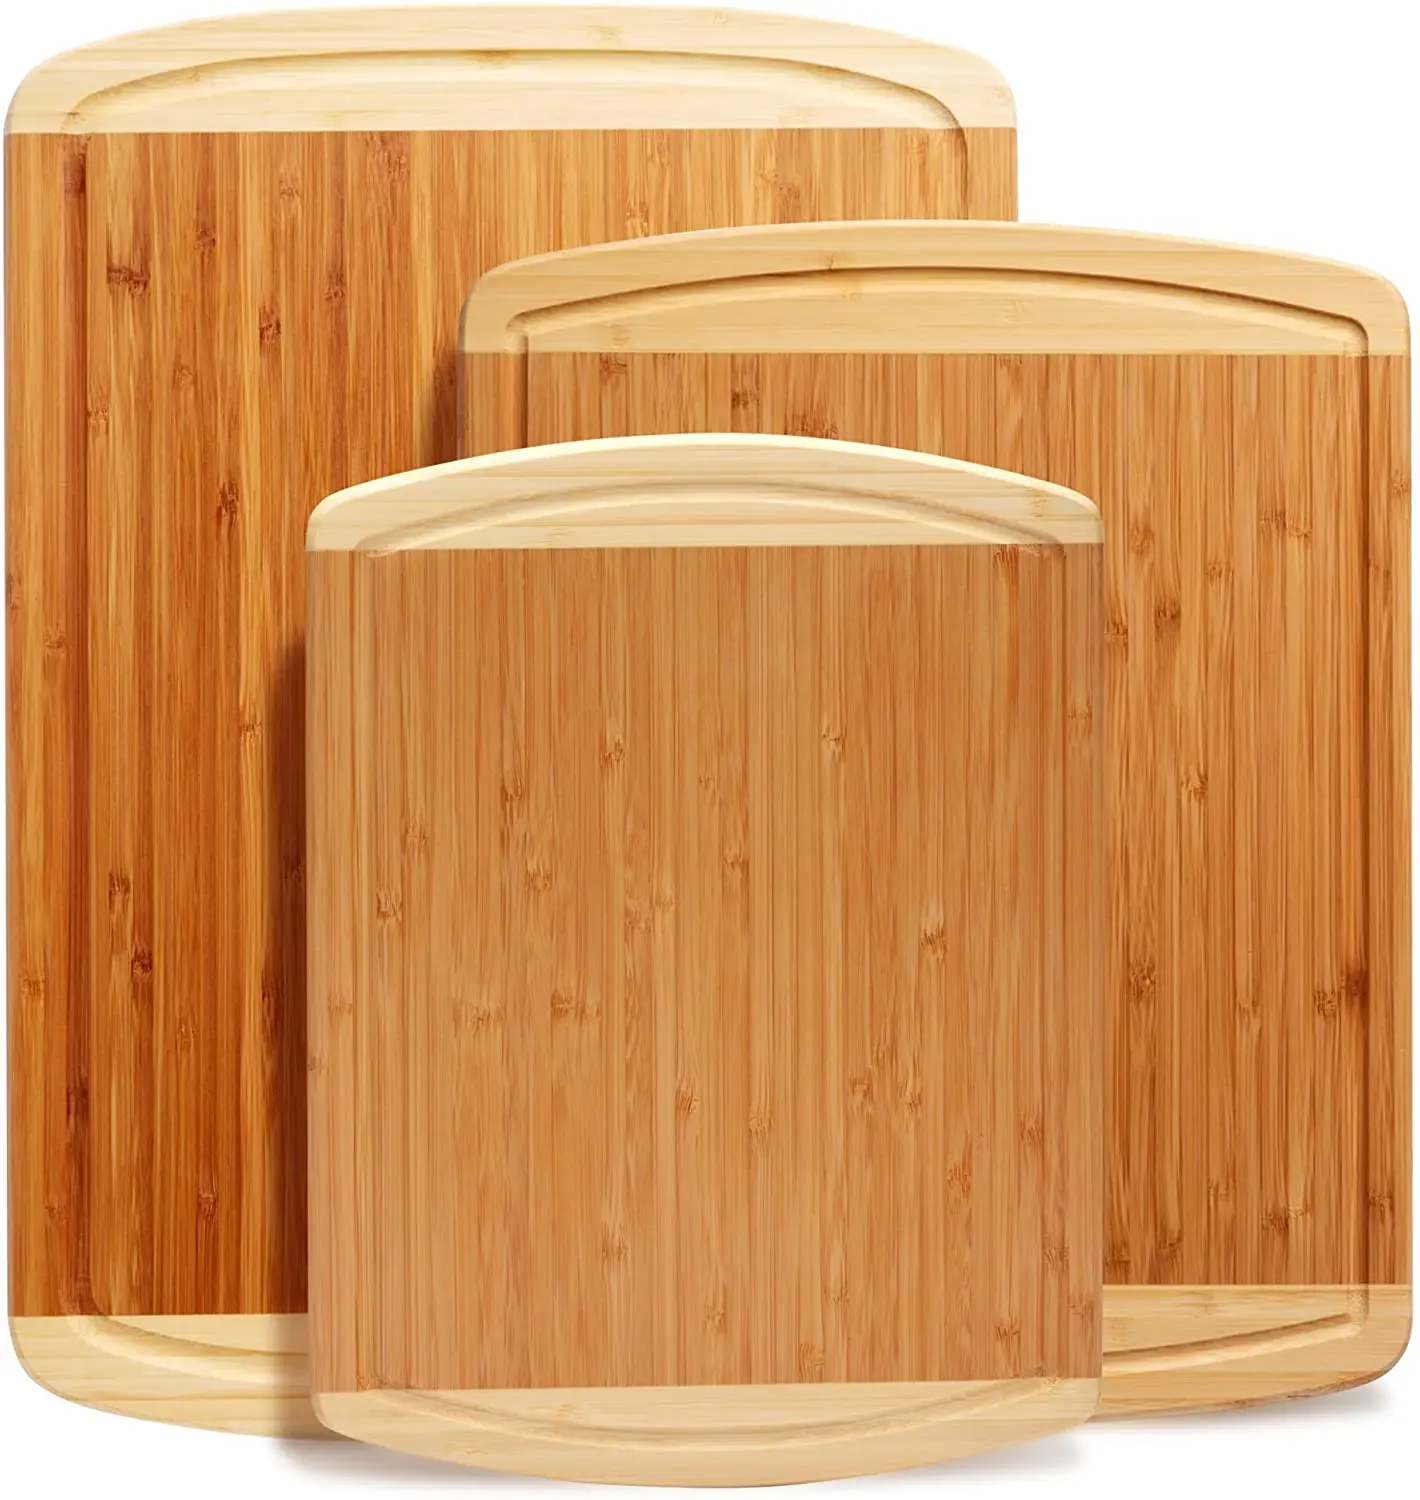 

Bamboo Cutting Board for Kitchen with Built-In Compartments and cutting board with juice groove for Meat Charcuterie Board